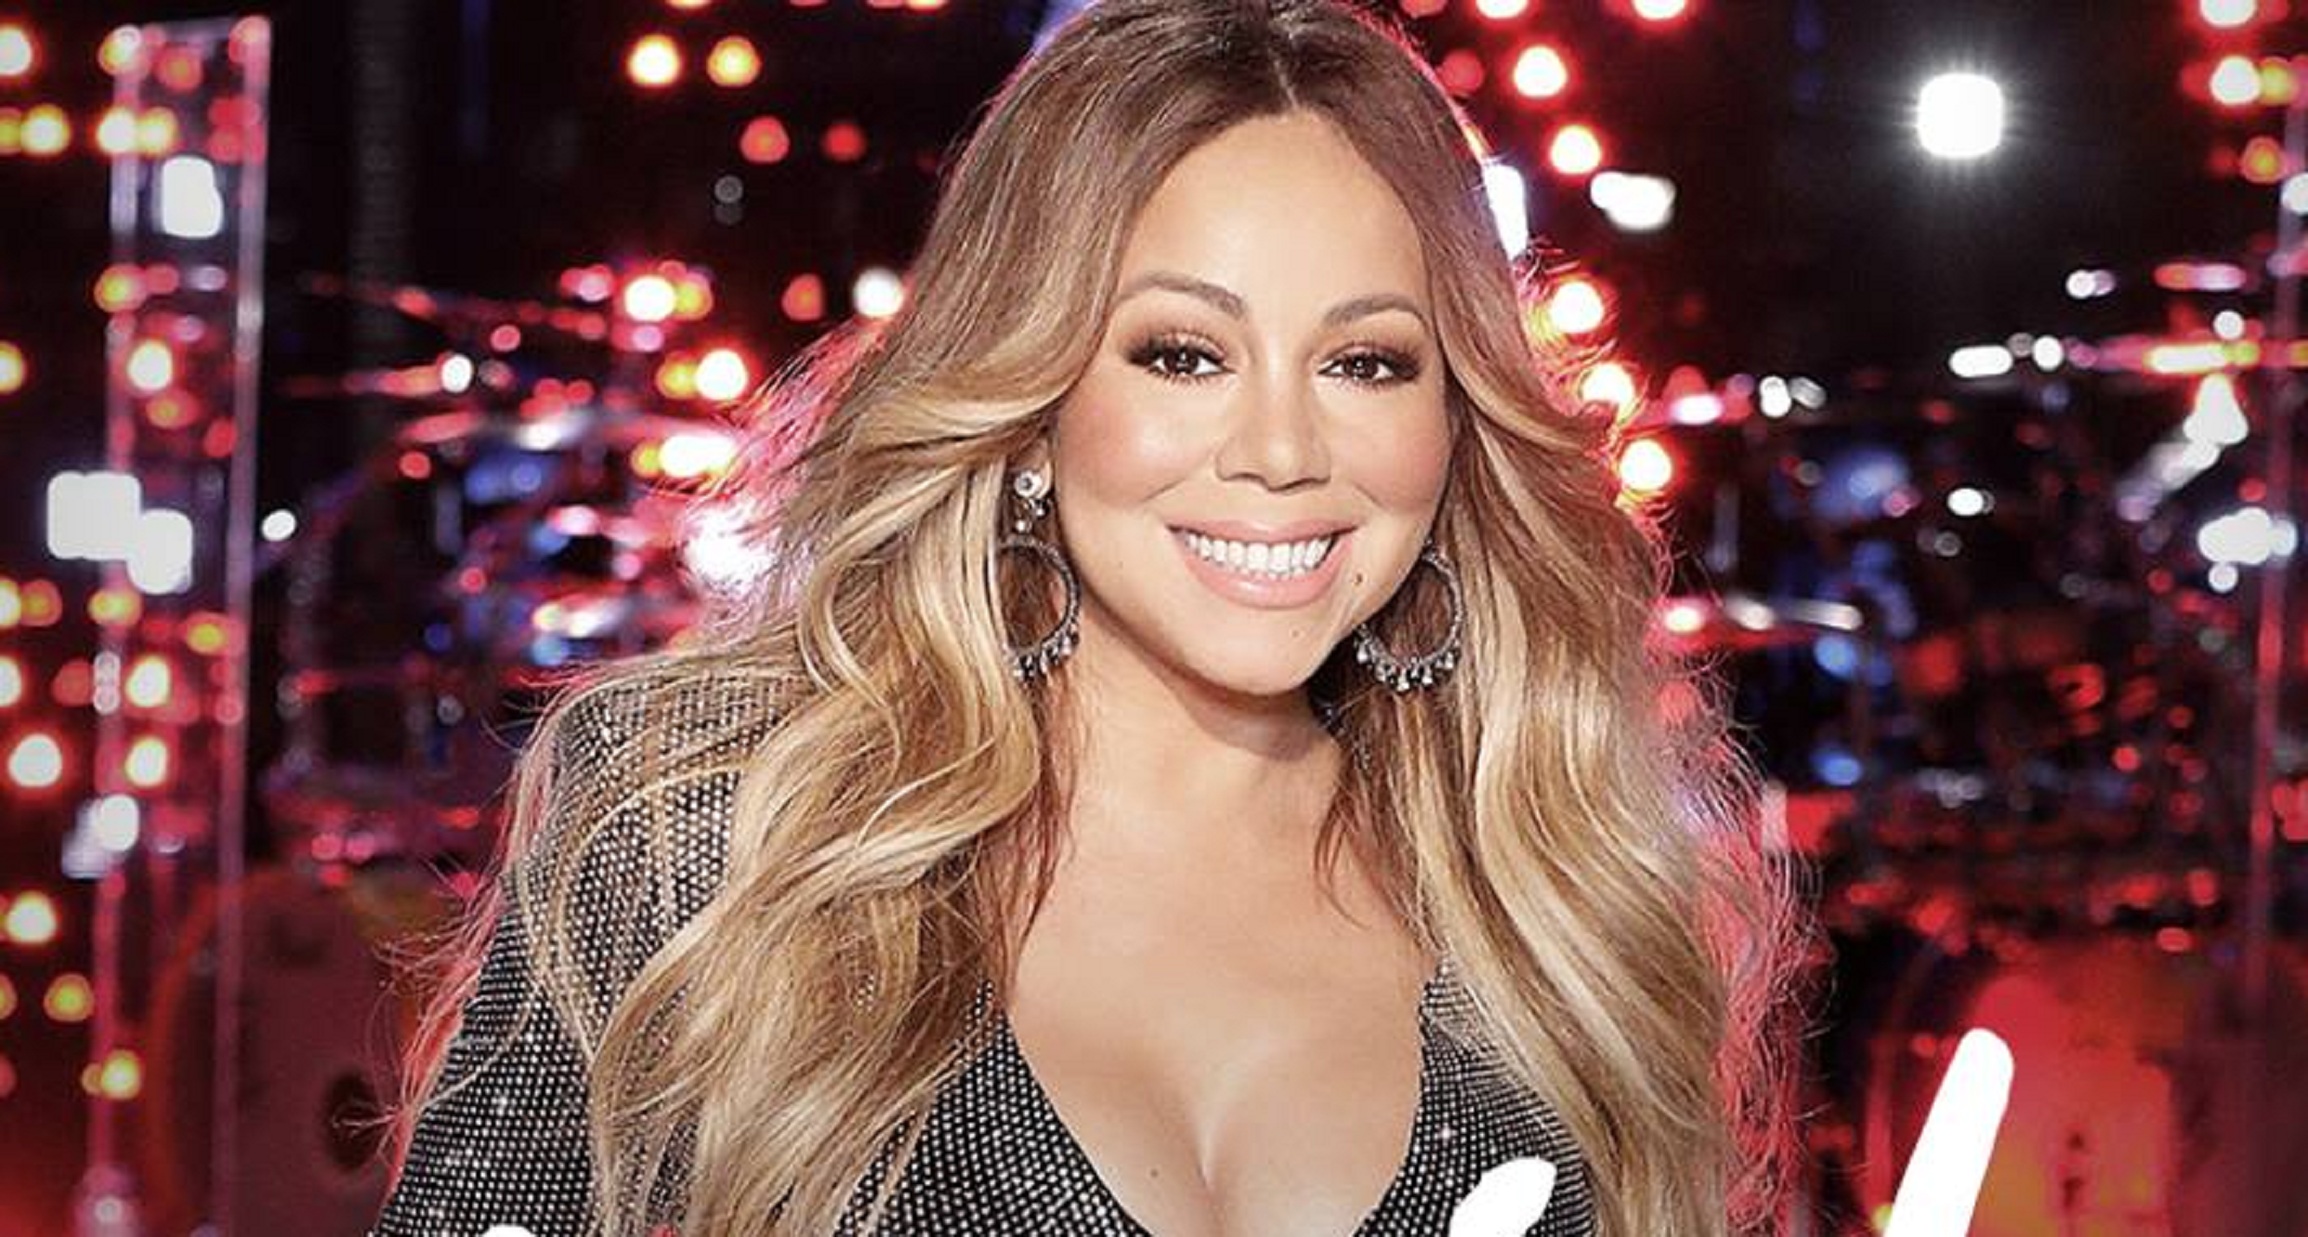 Mariah Carey To Be Honored At the 2019 Billboard Music Awards With Their ‘Icon Award’